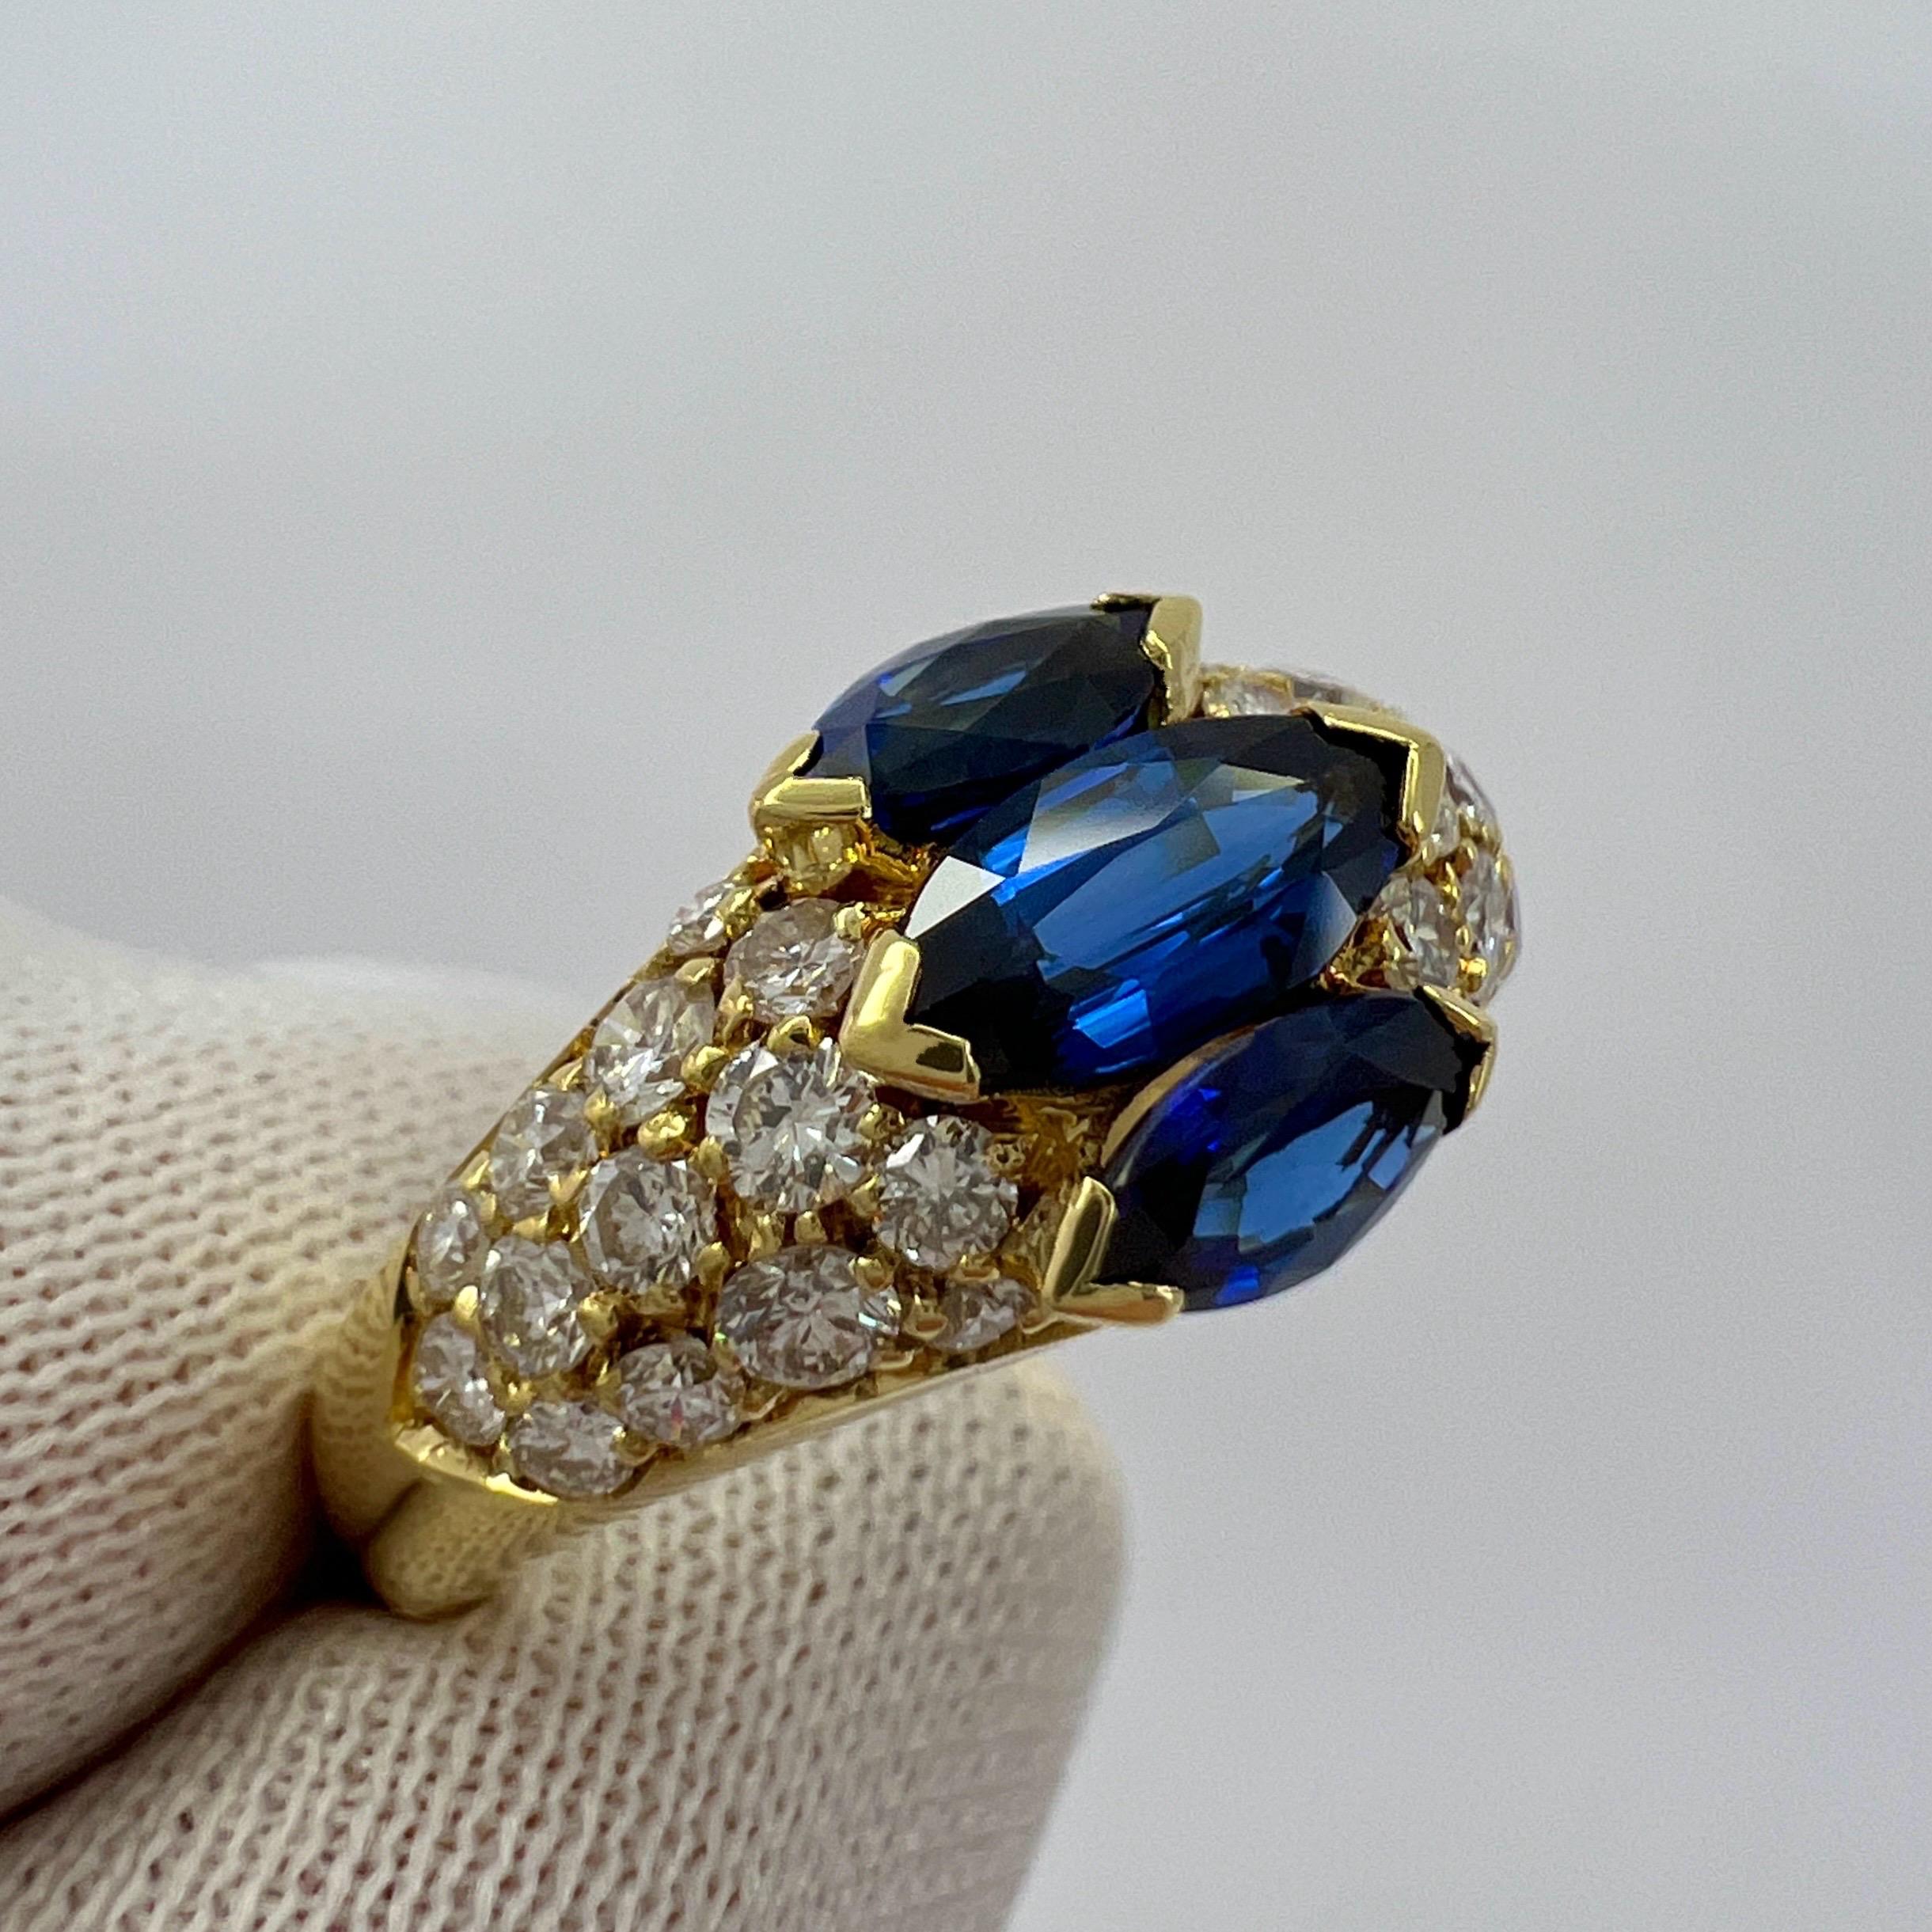 Rare Vintage Van Cleef & Arpels Marquise Blue Sapphire And Diamond Cocktail Ring For Sale 6